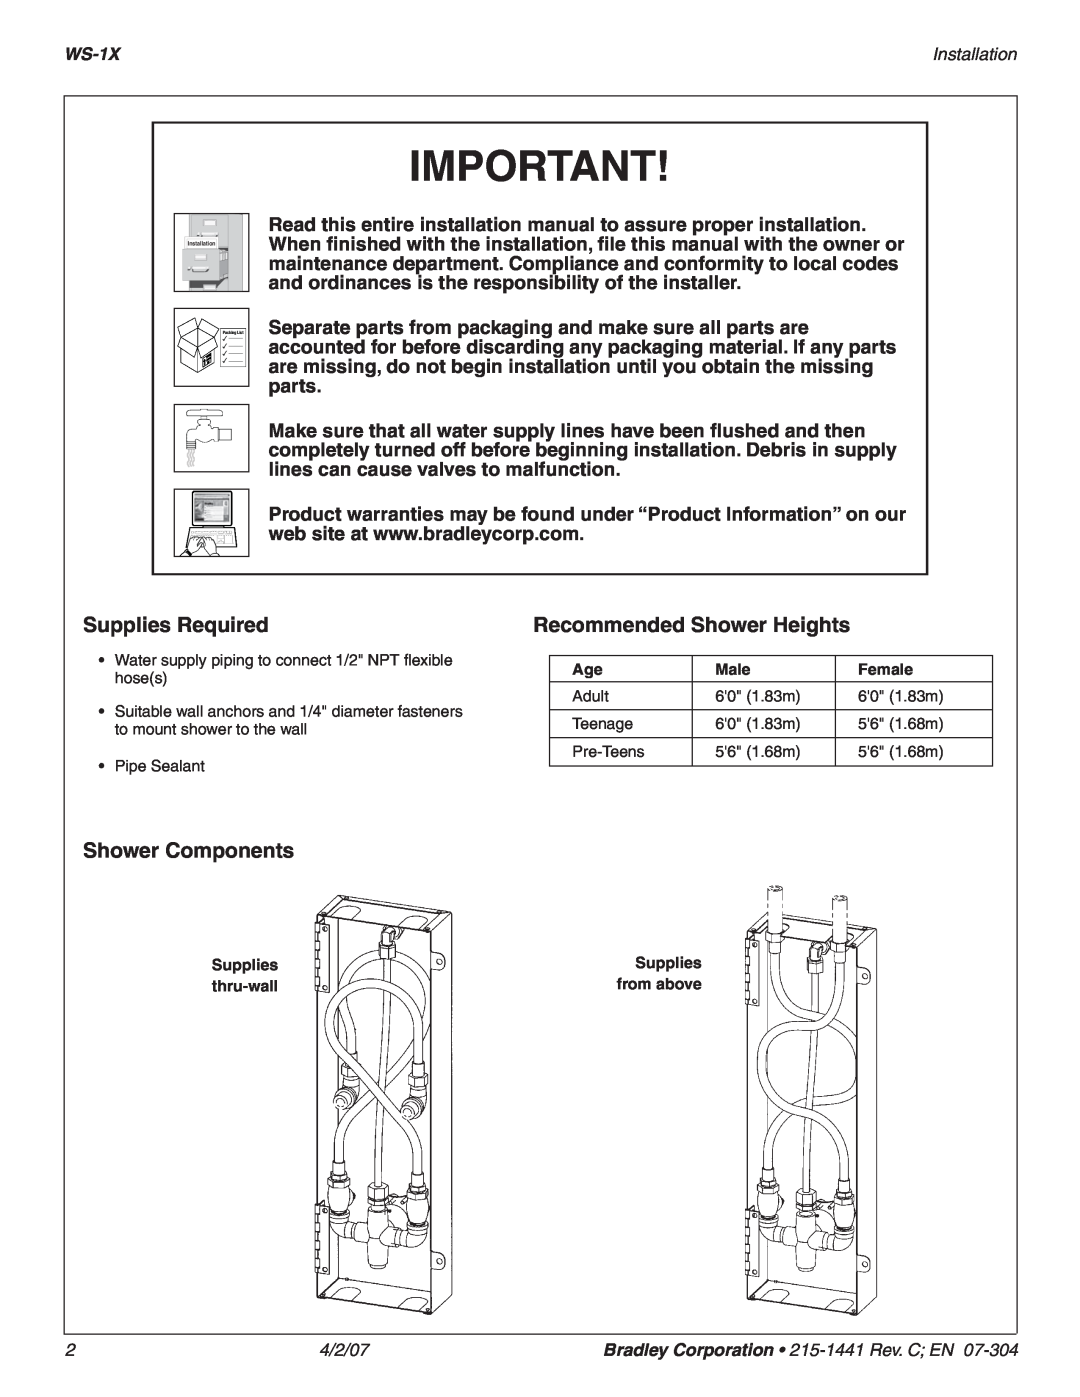 Bradley Smoker WS-1X dimensions Supplies Required, Shower Components, Recommended Shower Heights, Installation 